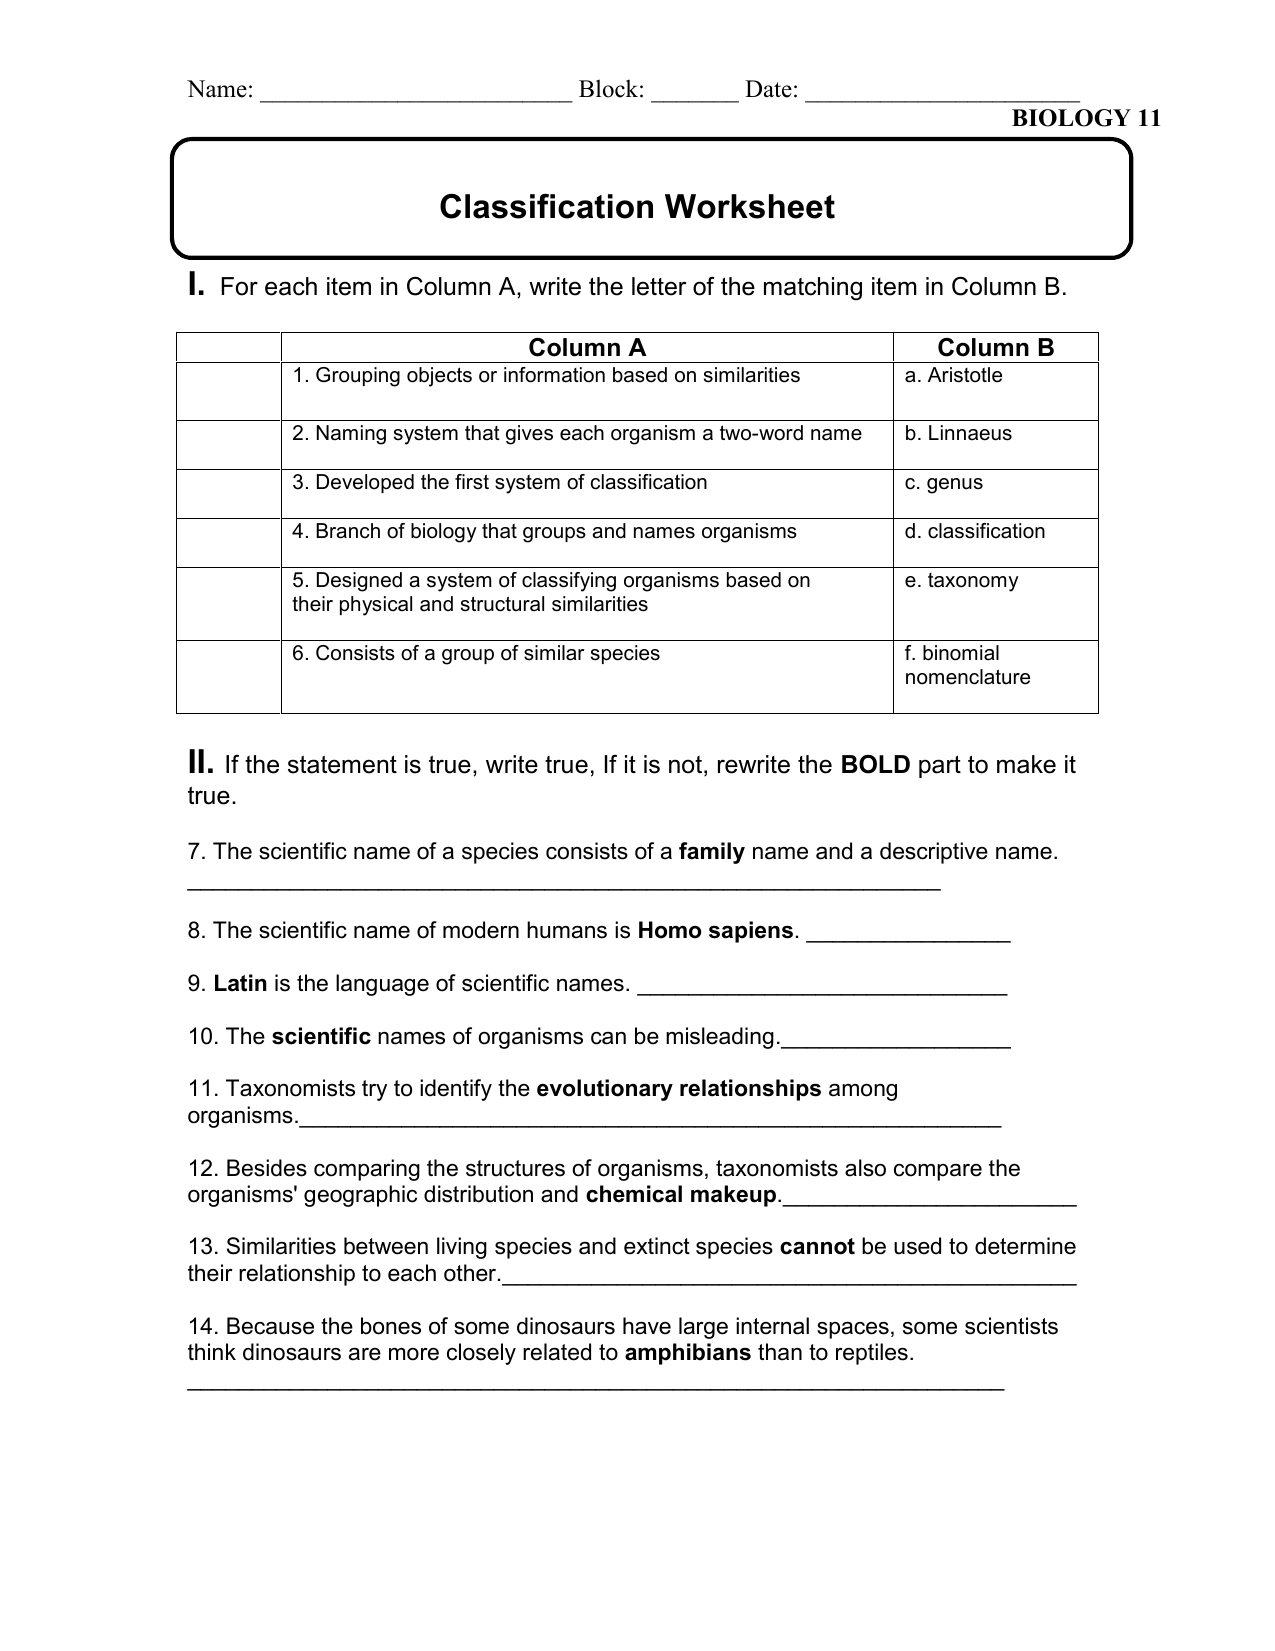 Classification Worksheet In Biological Classification Worksheet Answers